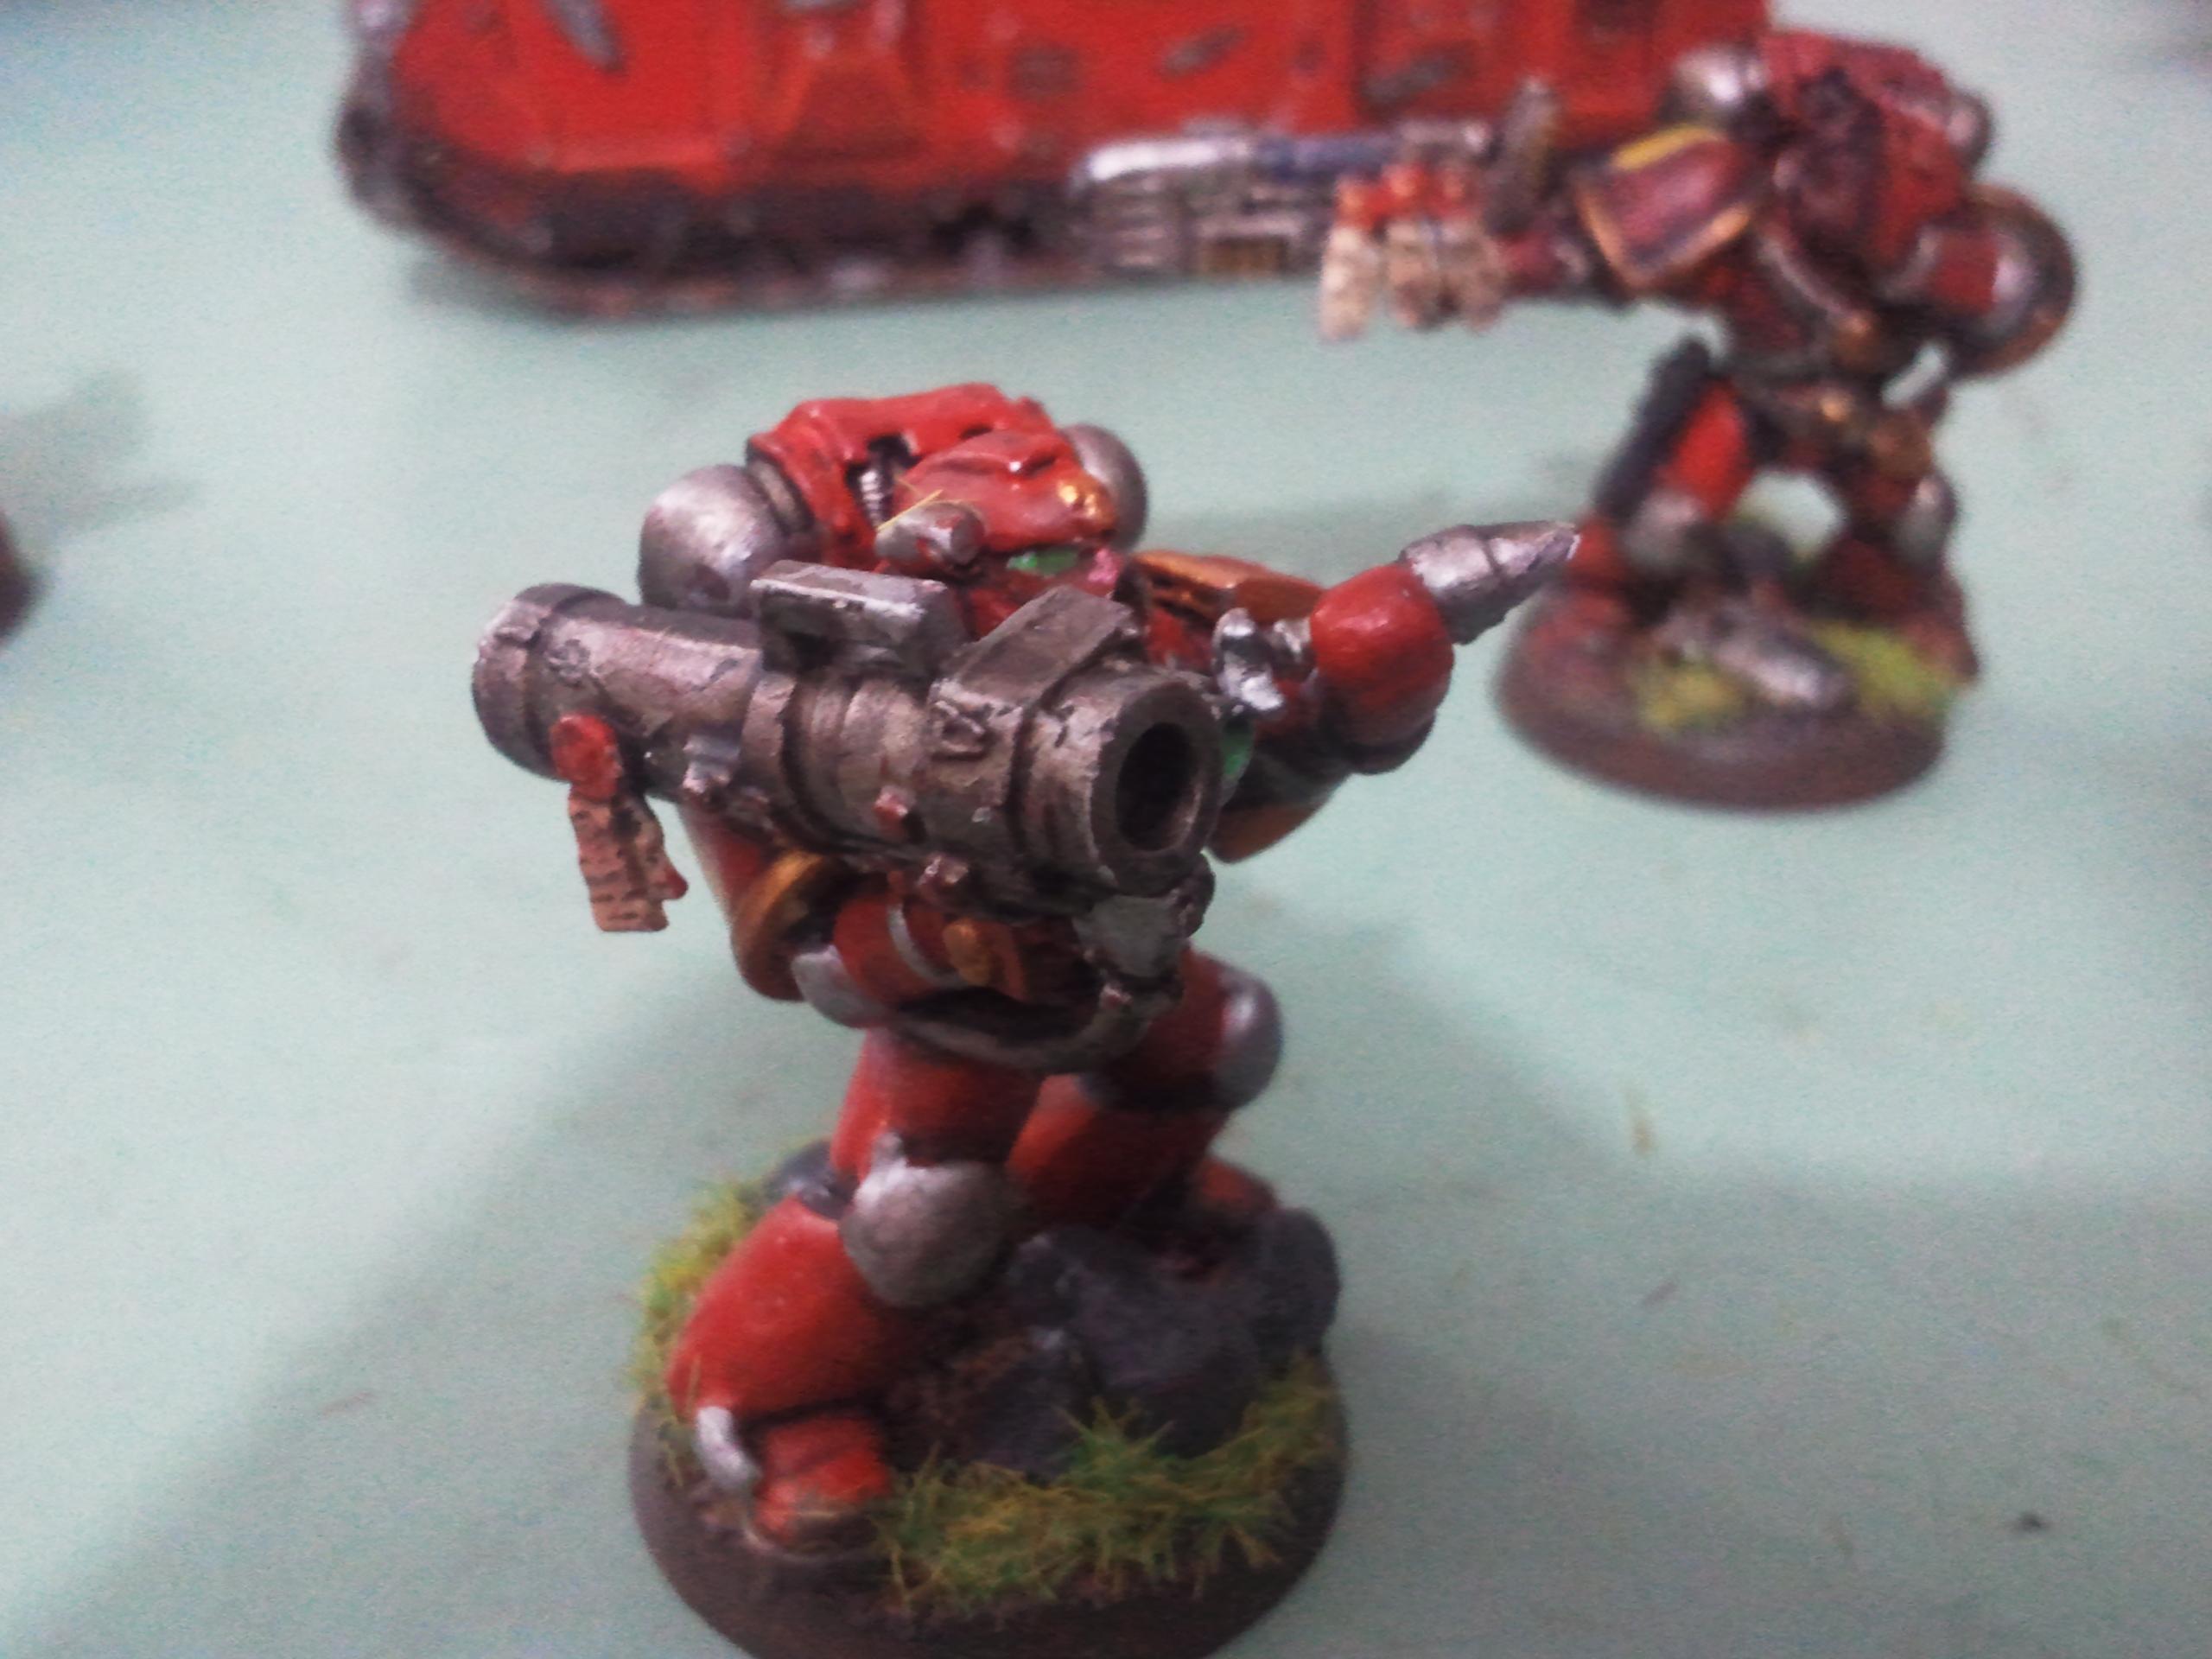 Blood Angels, Space Marines, Tactical